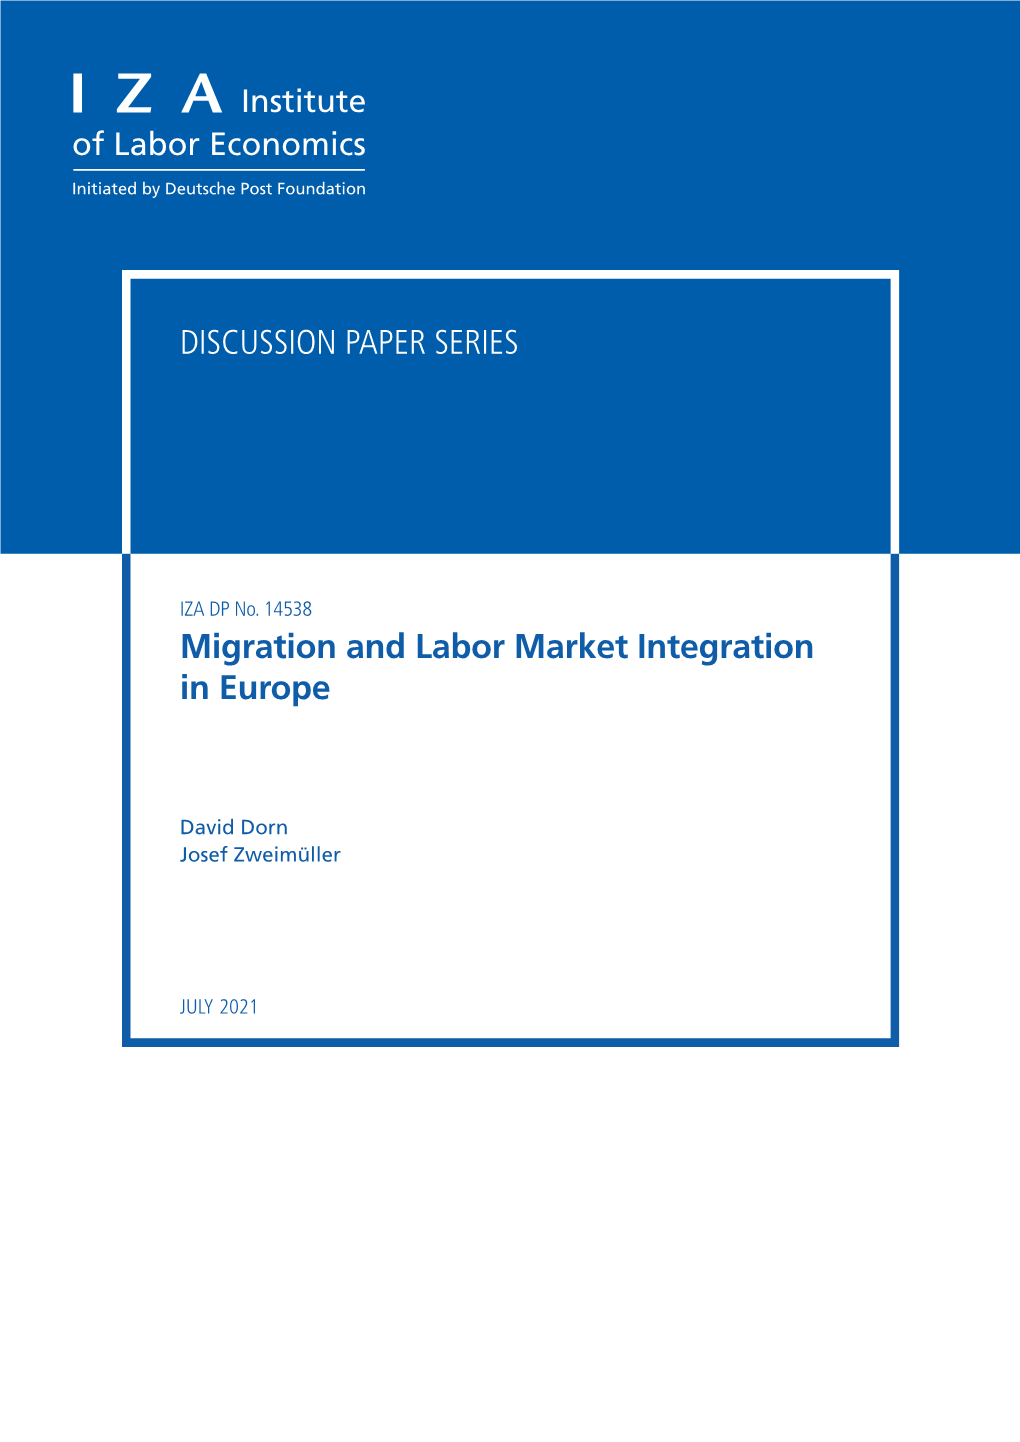 Migration and Labor Market Integration in Europe